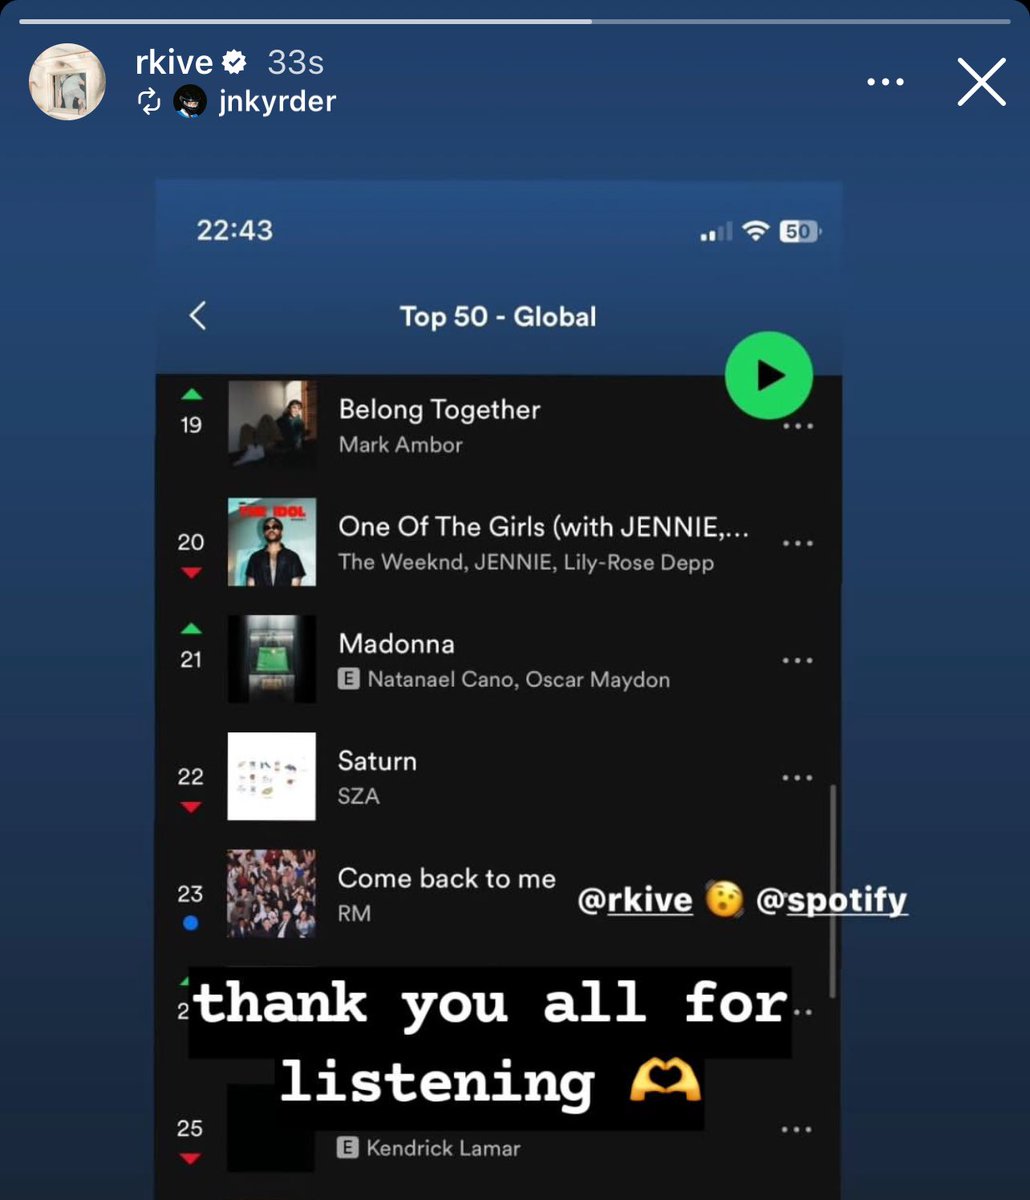 NAMJOON SAW THE SPOTIFY CHART 🥹😭

“thank you all for listening 🫶”